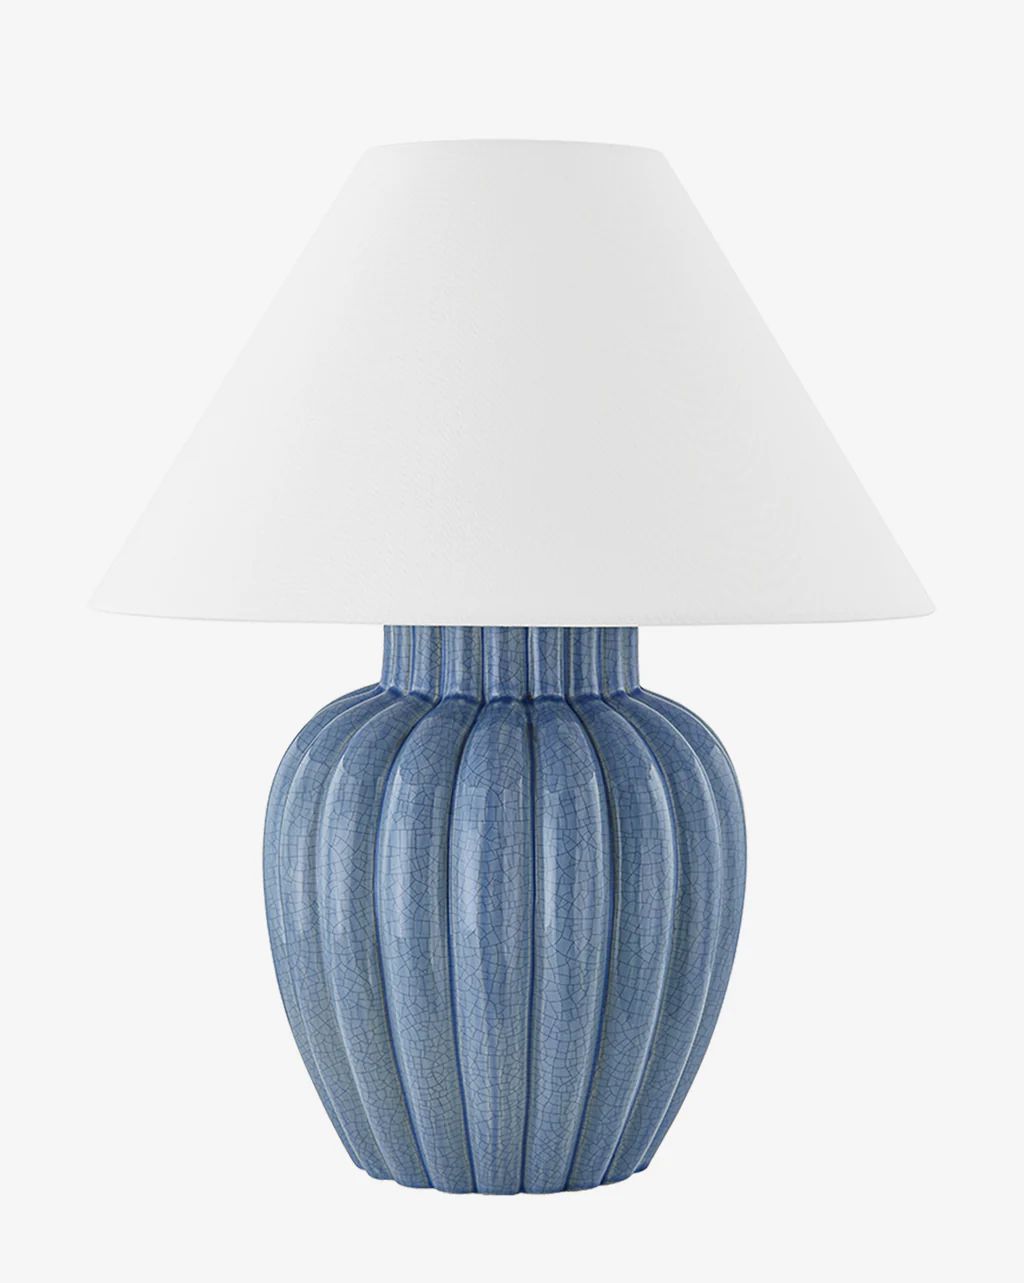 Clarendon Table Lamp | McGee & Co. (US)